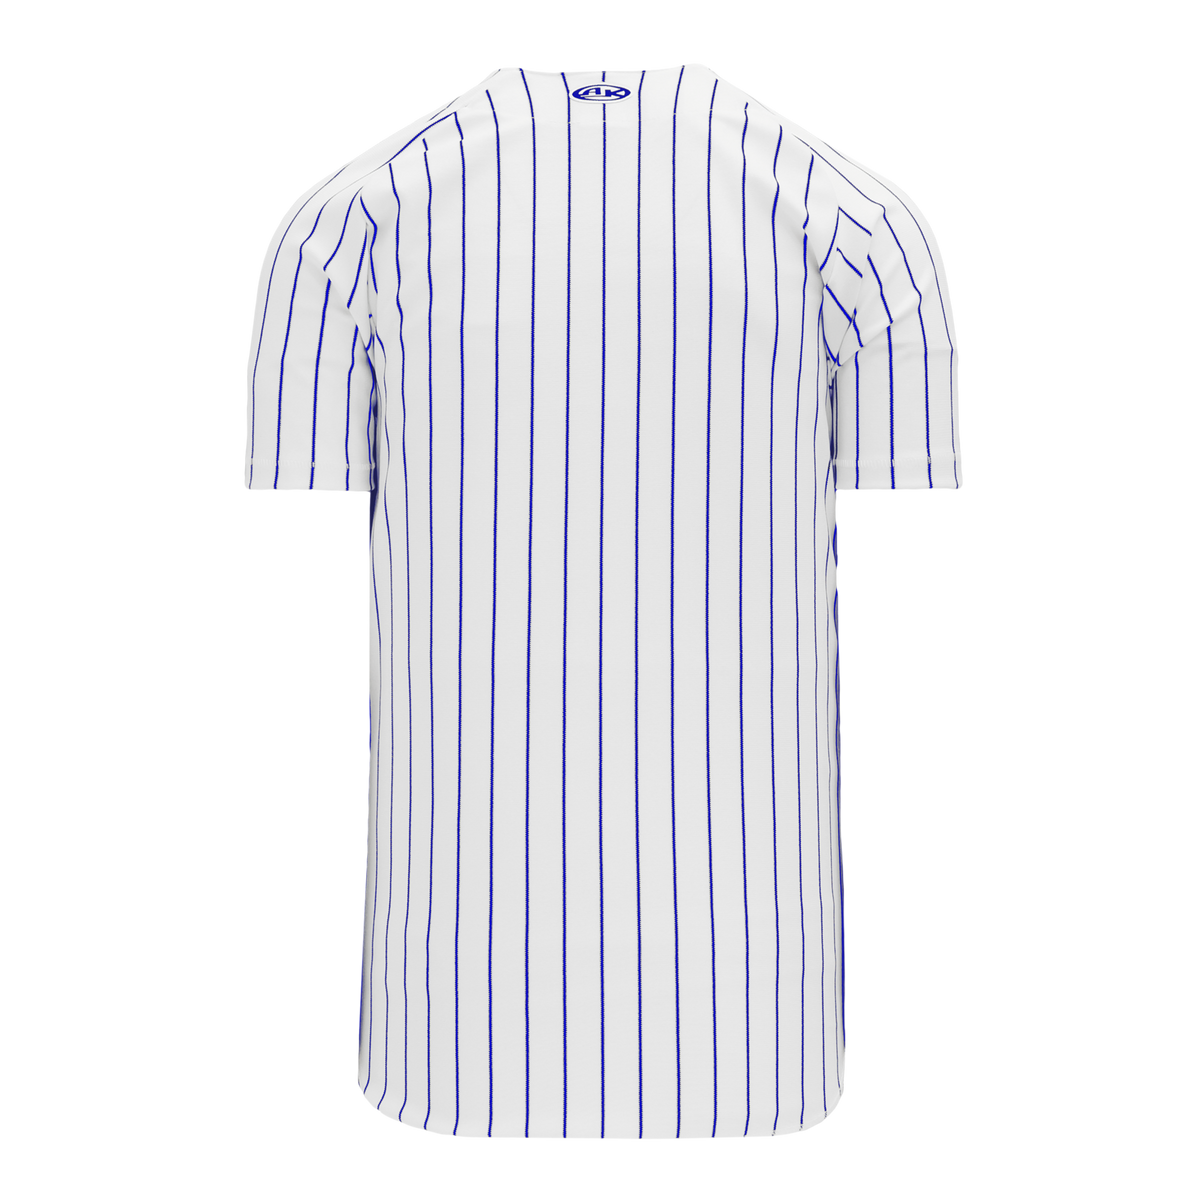 Custom Men's Pinstripe Basketball Jersey Stitched Name Number for Men Youth  S-6XL 